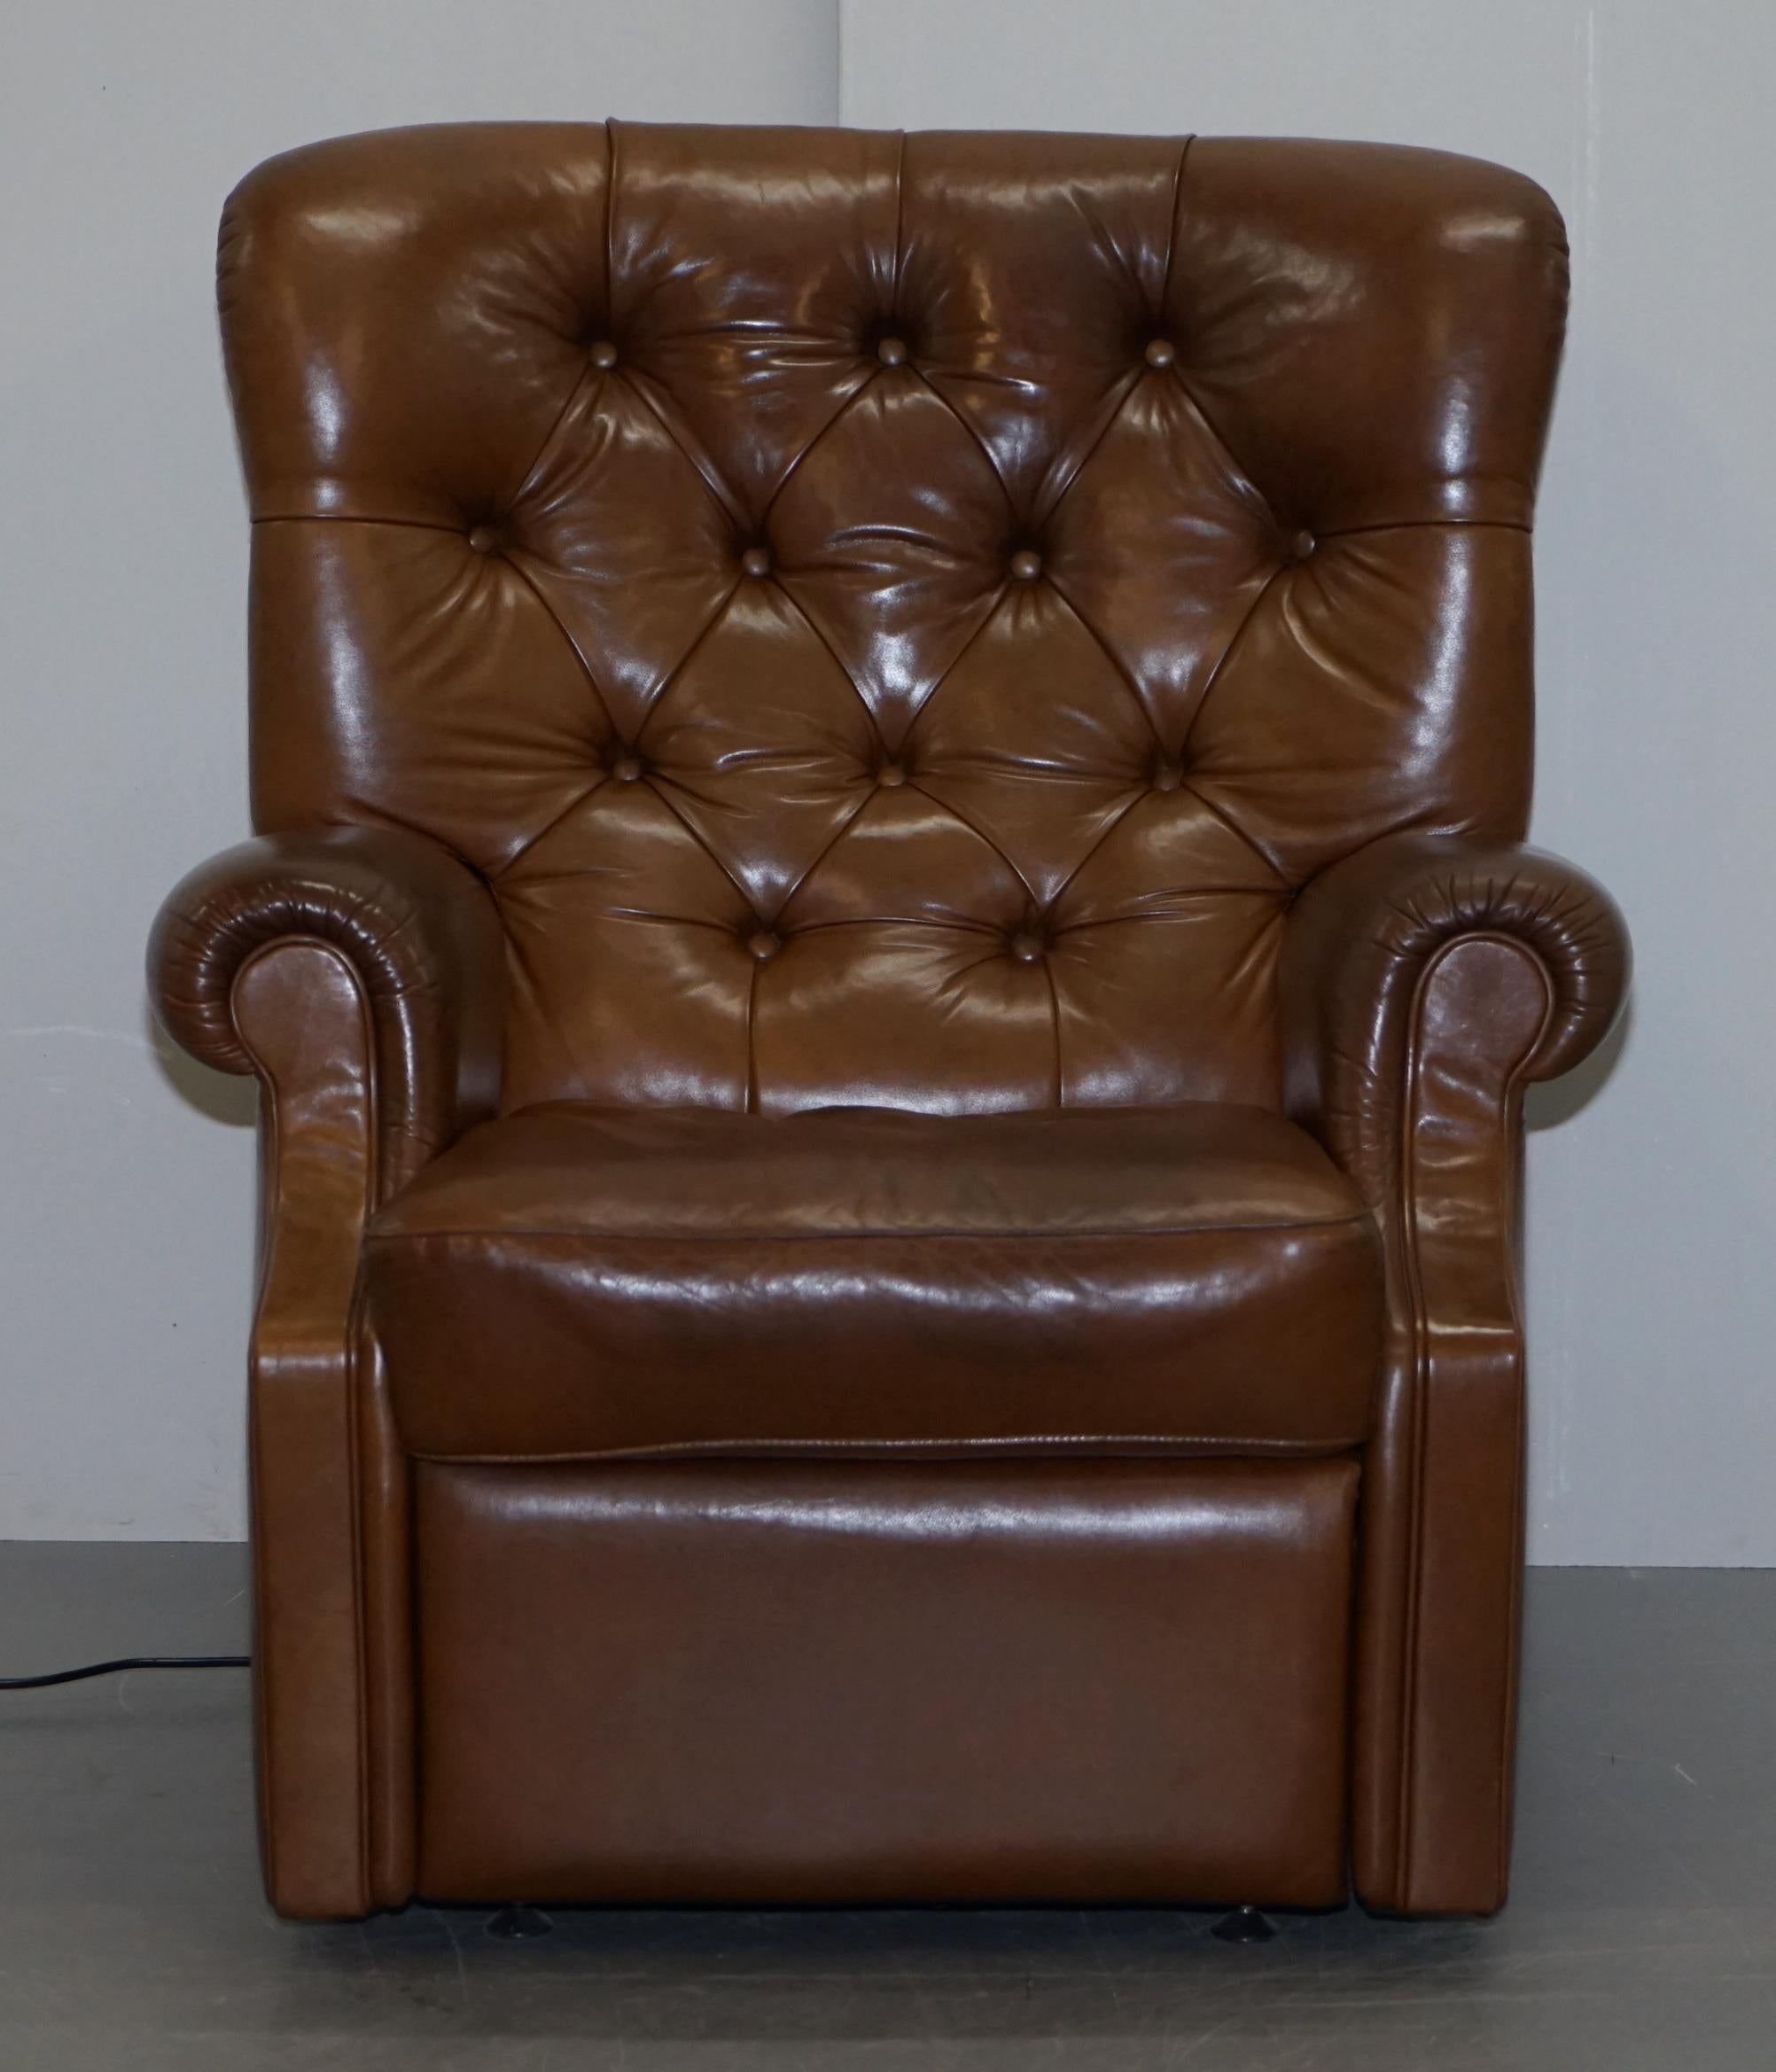 We are delighted to offer for sale this tan brown leather chesterfield tufted electric reclining armchair

A good looking well made and very comfortable armchair, this fully reclines to being almost totally flat, ideal for those afternoon